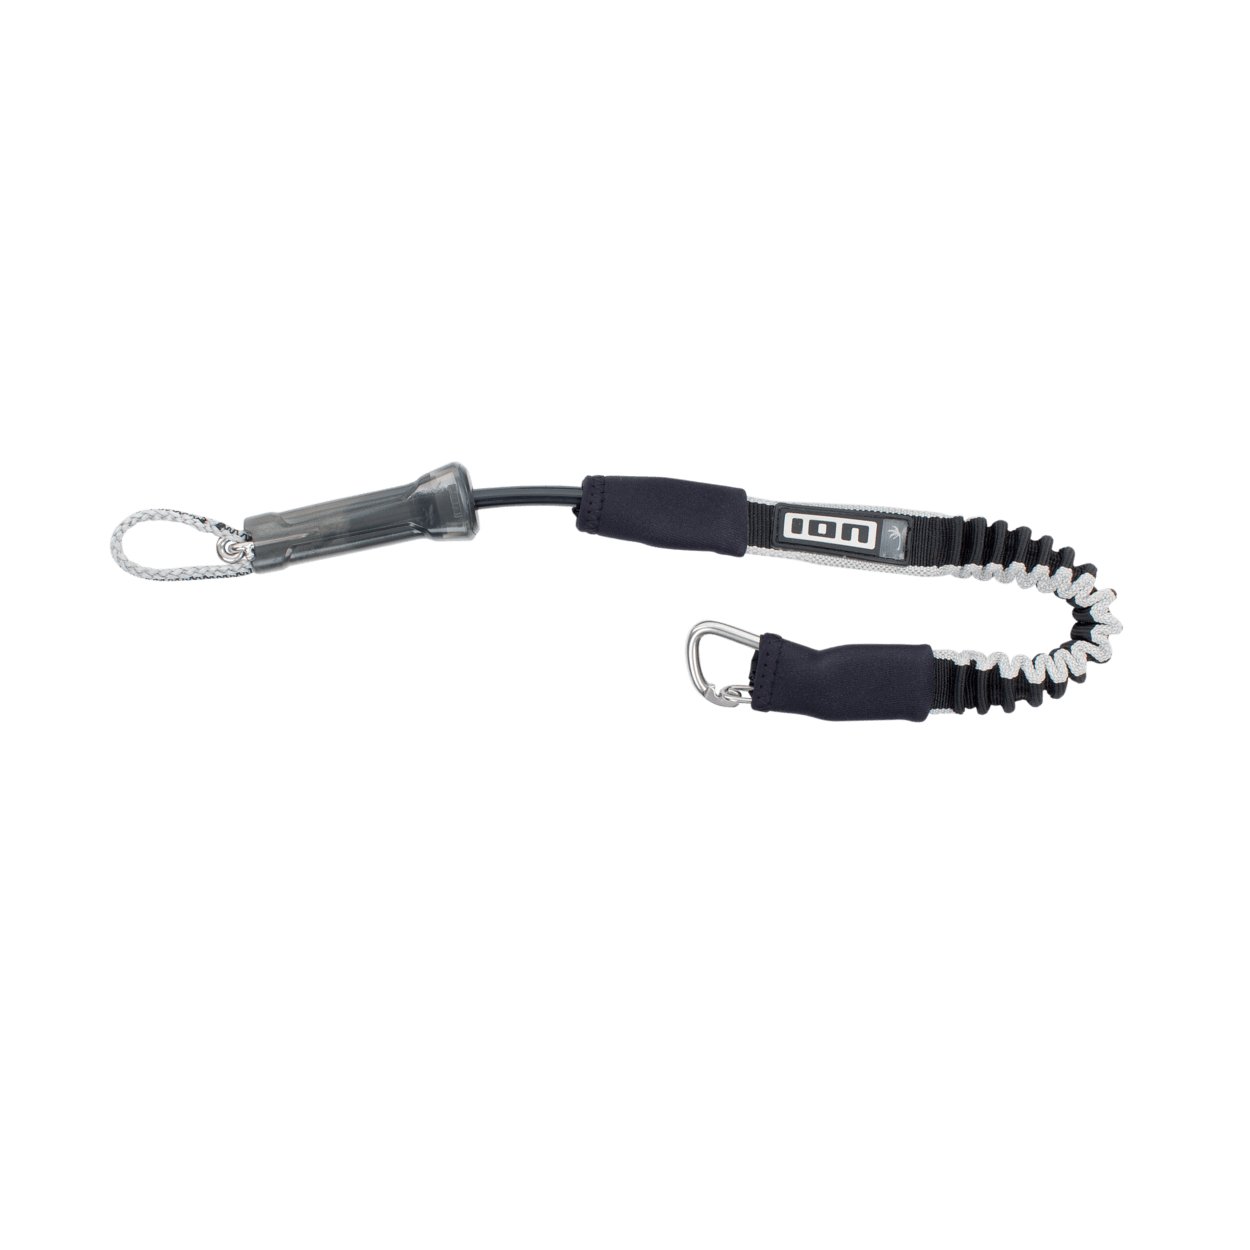 ION Short Leash Webbing 2022 - Worthing Watersports - 9008415960477 - Accessories - ION Water